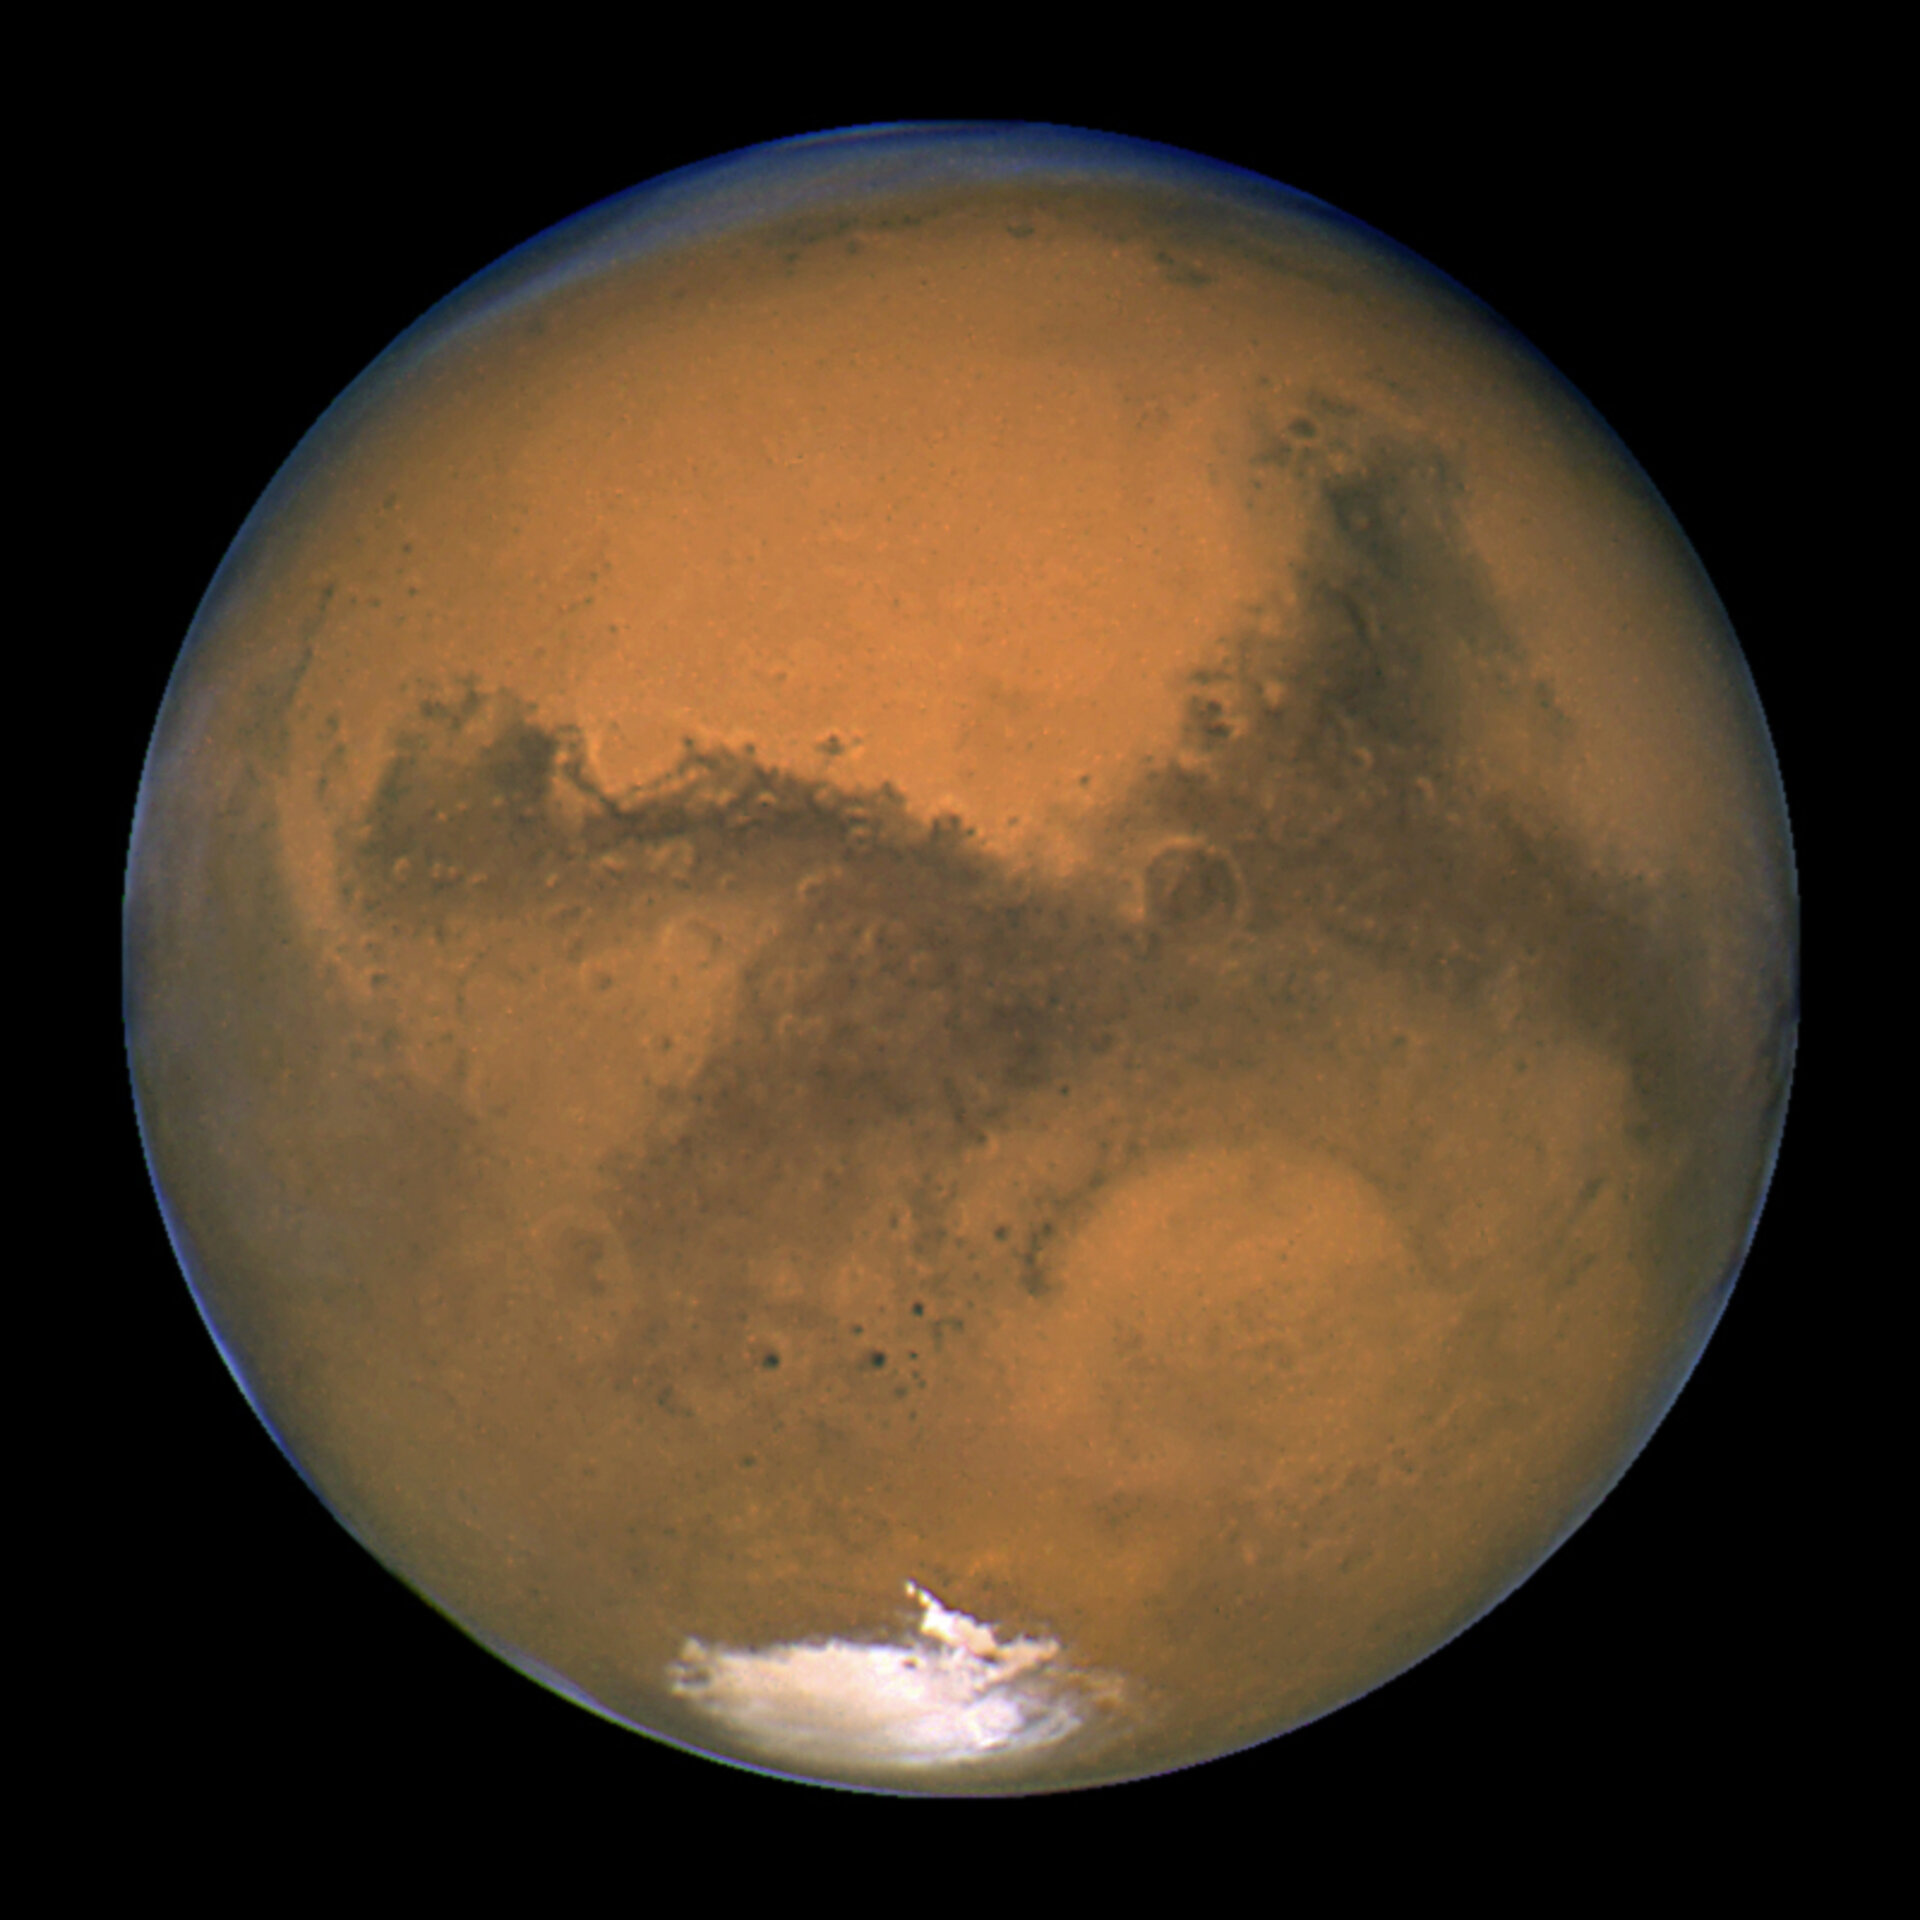 Hubble's close encounter with Mars